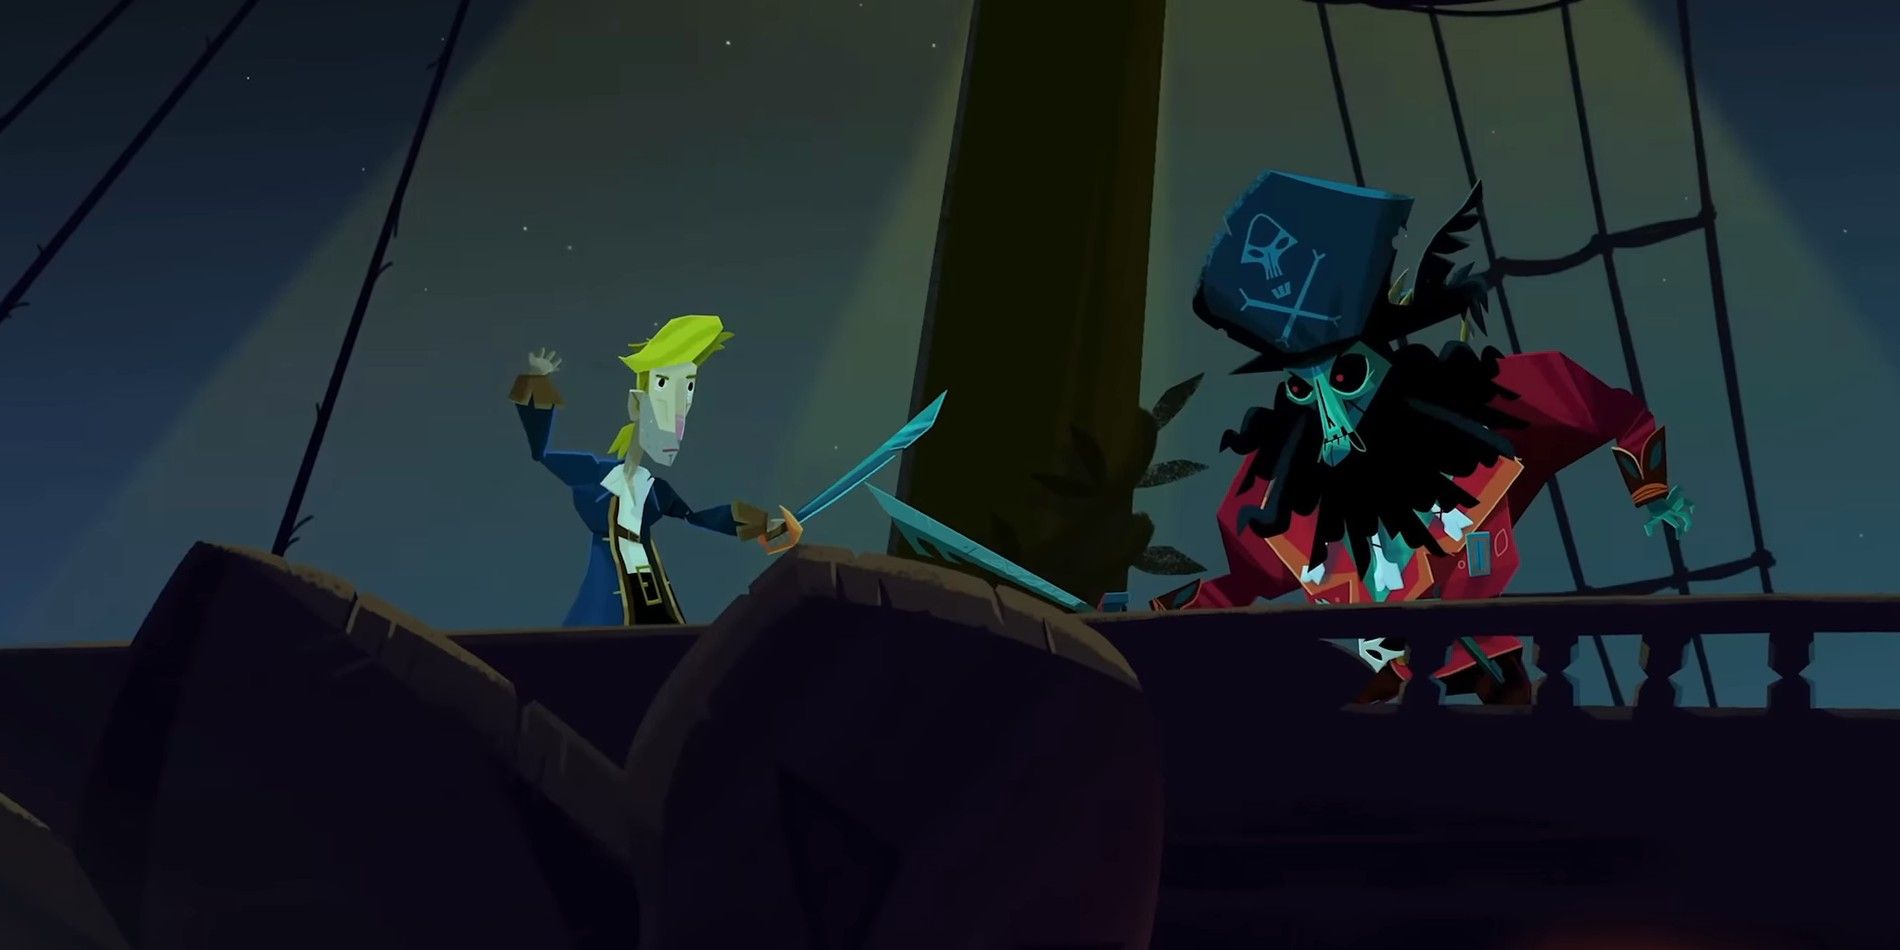 Guybrush and LeChuck Fight In Return To Monkey Island Trailer